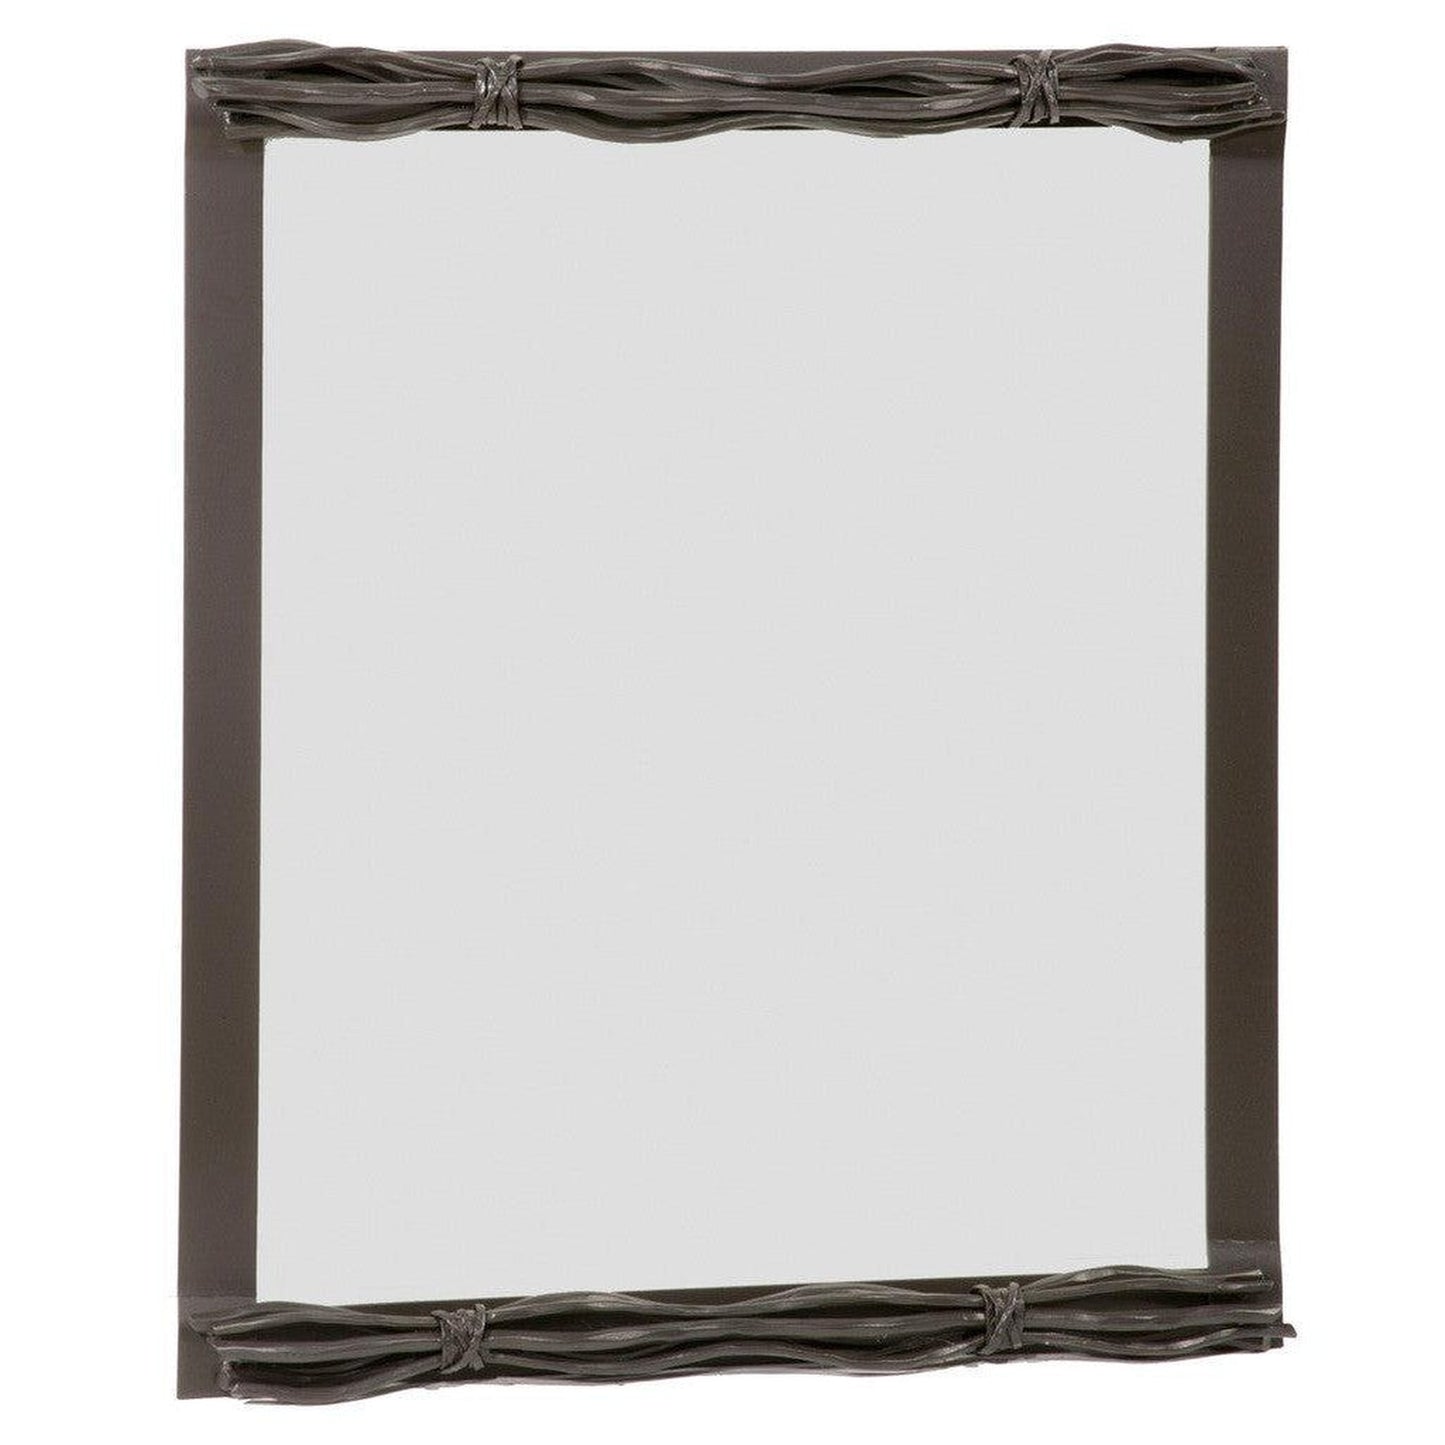 Stone County Ironworks Rush 21" x 26" Small Burnished Gold Iron Wall Mirror